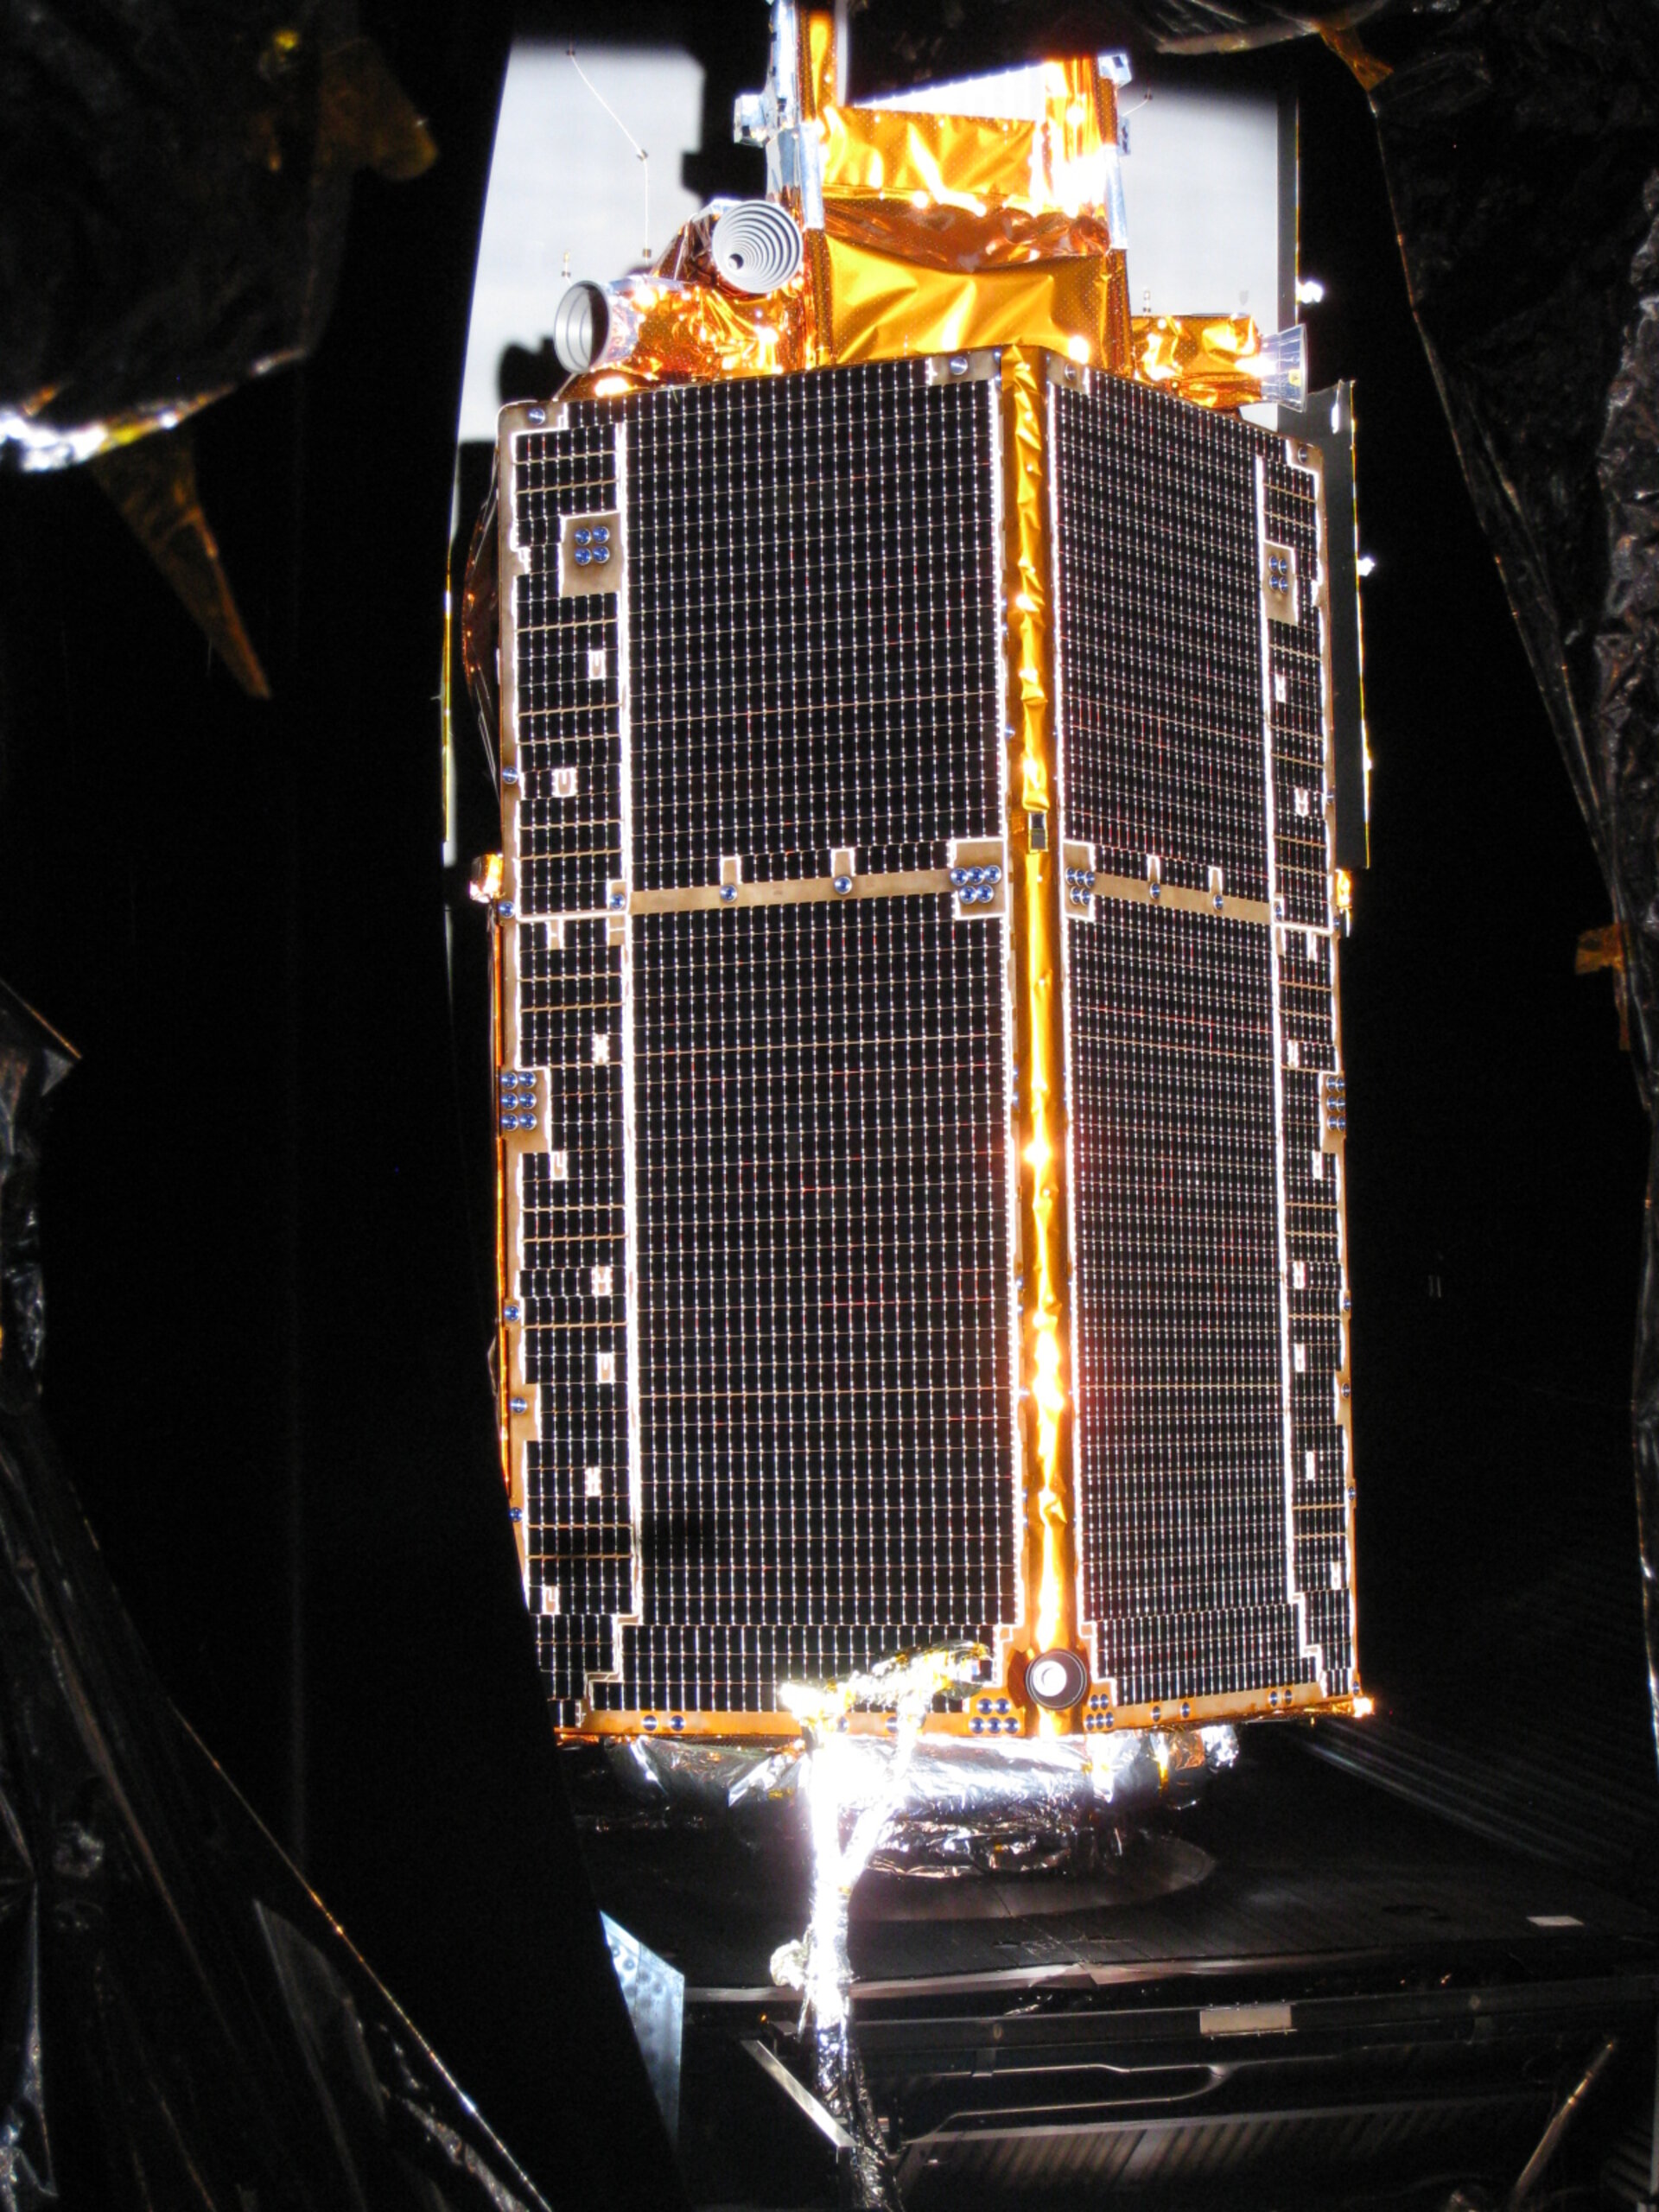 CryoSat-2 in the solar simulation chamber